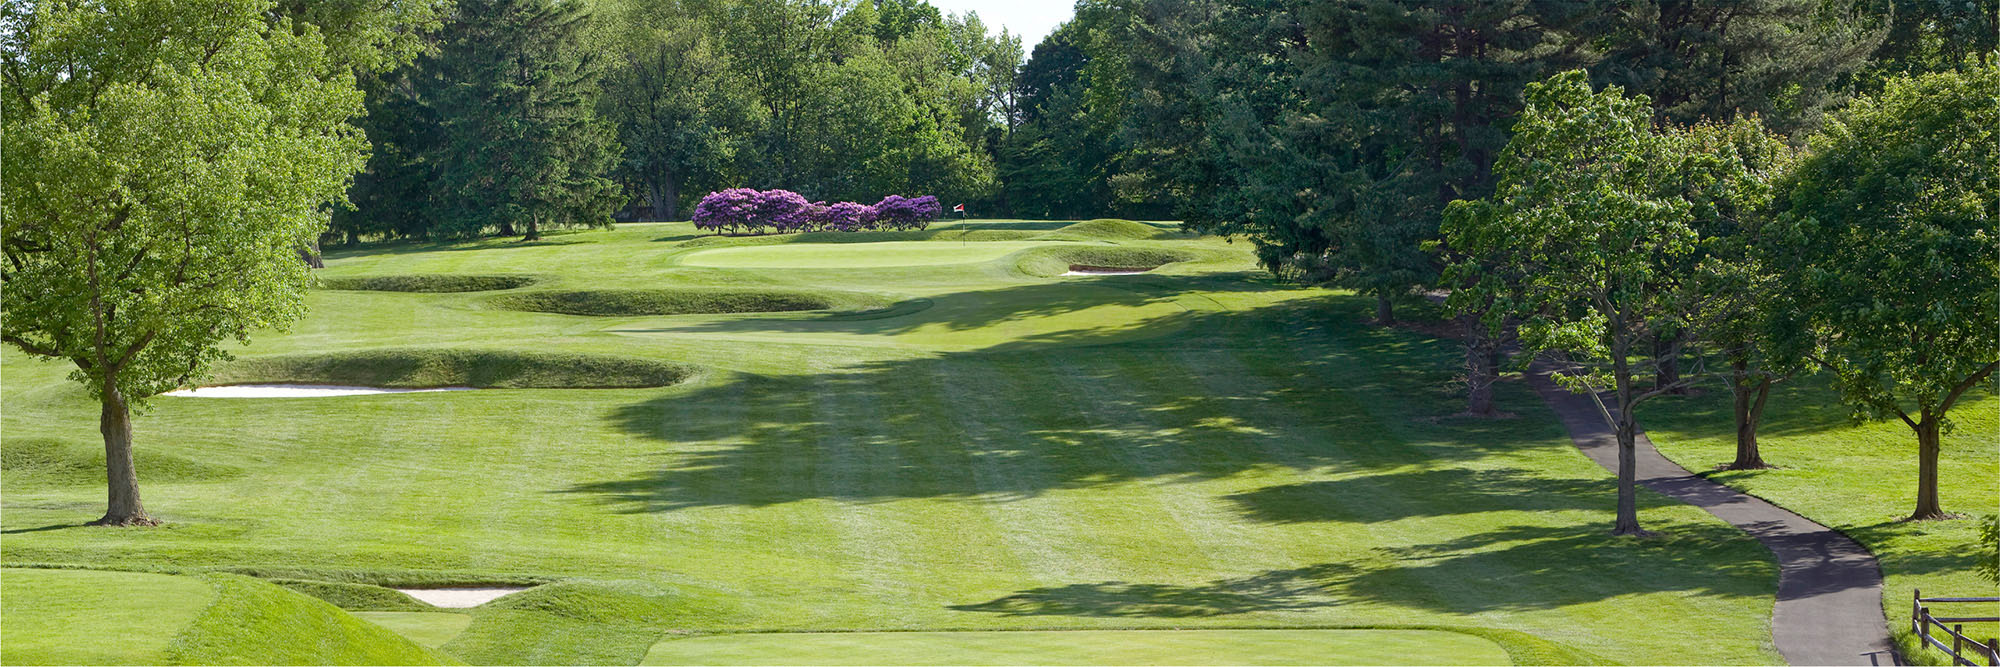 Golf Course Image - LuLu Country Club No. 6